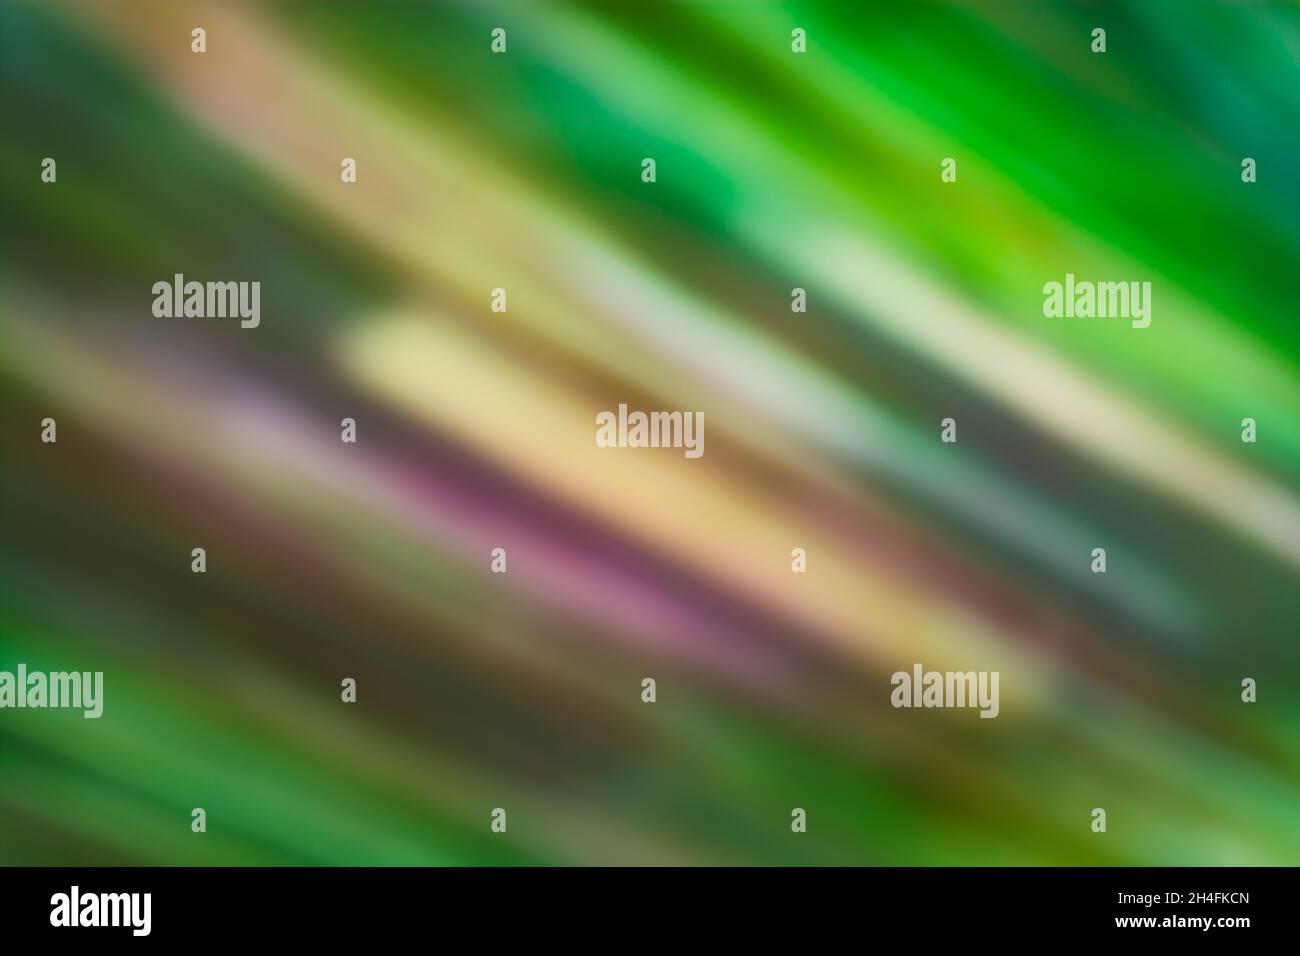 Abstract background in green tones with wide ragged diagonal multicolored lines with a slight blur. Unique backdrop. Stock Photo